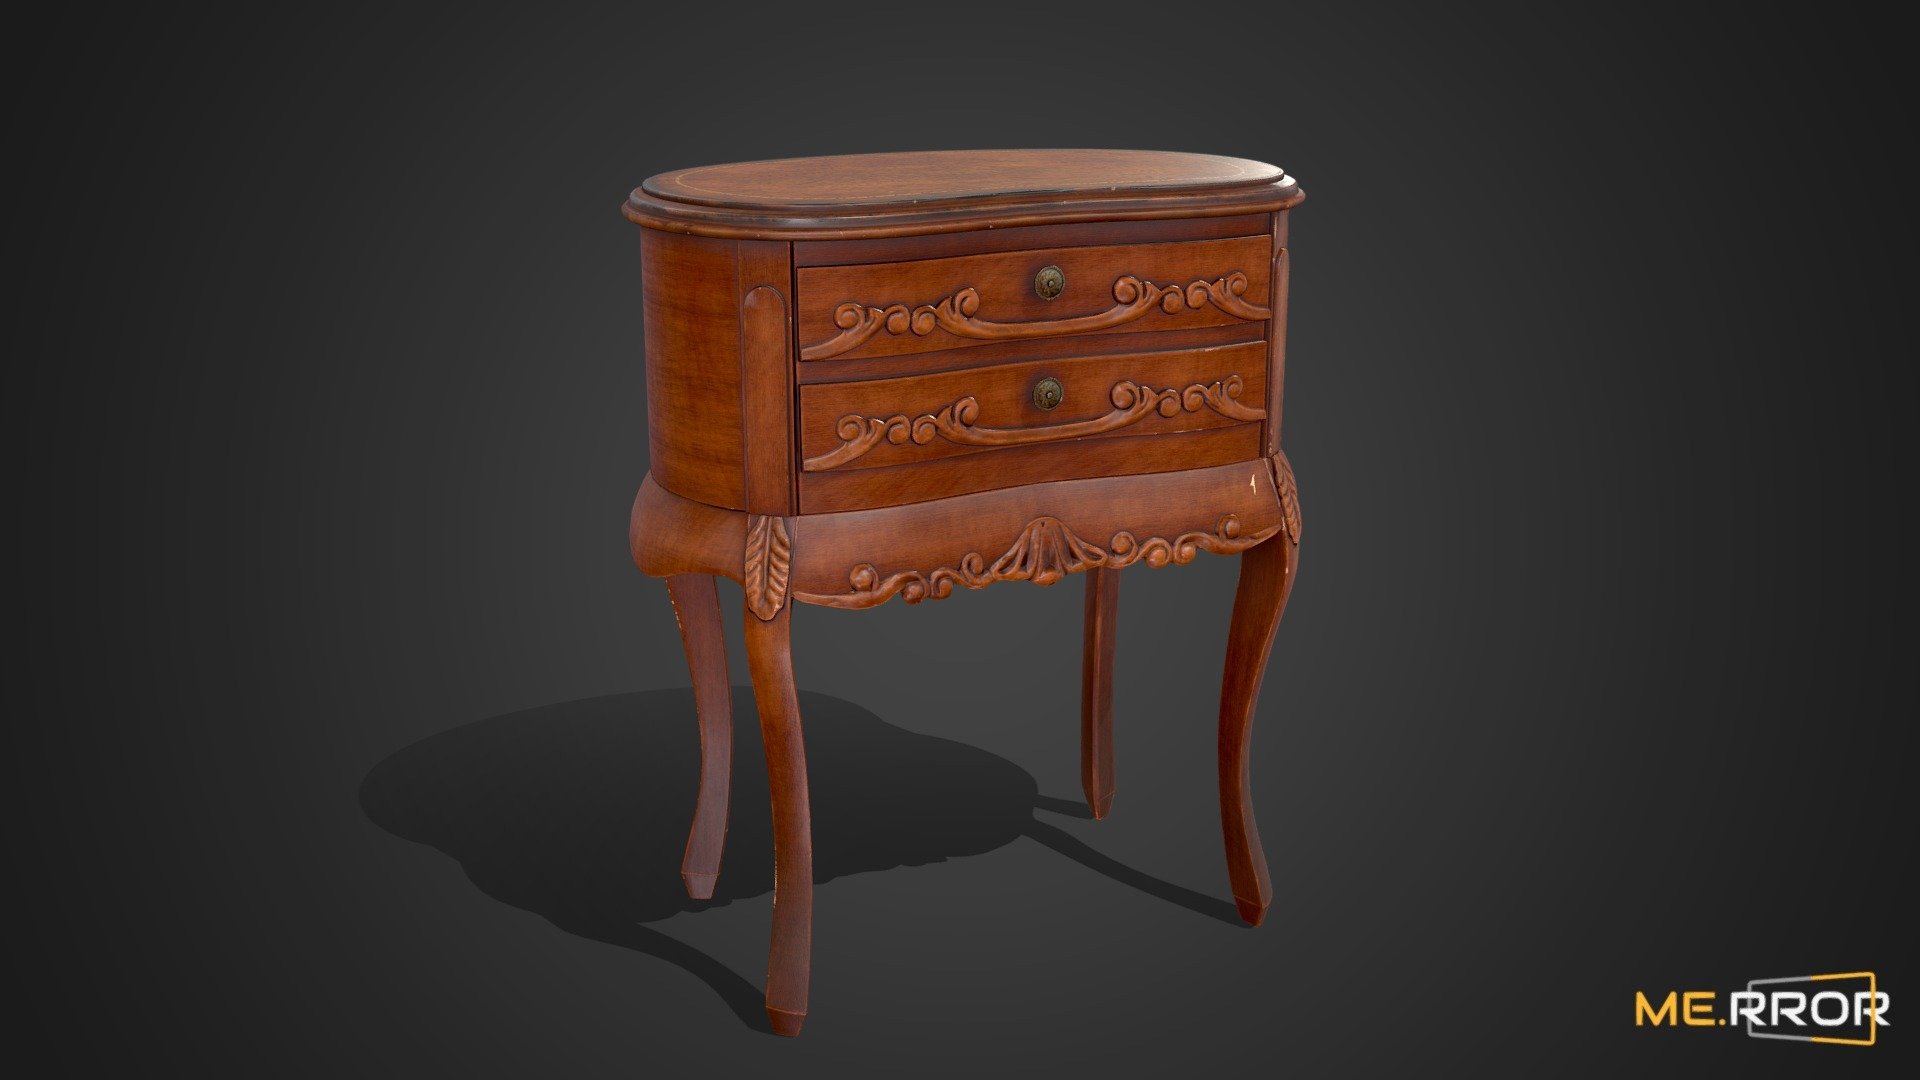 MERROR is a 3D Content PLATFORM which introduces various Asian assets to the 3D world


3DScanning #Photogrametry #ME.RROR - [Game-Ready] Antique Wooden Desk 2 - Buy Royalty Free 3D model by ME.RROR Studio (@merror) 3d model